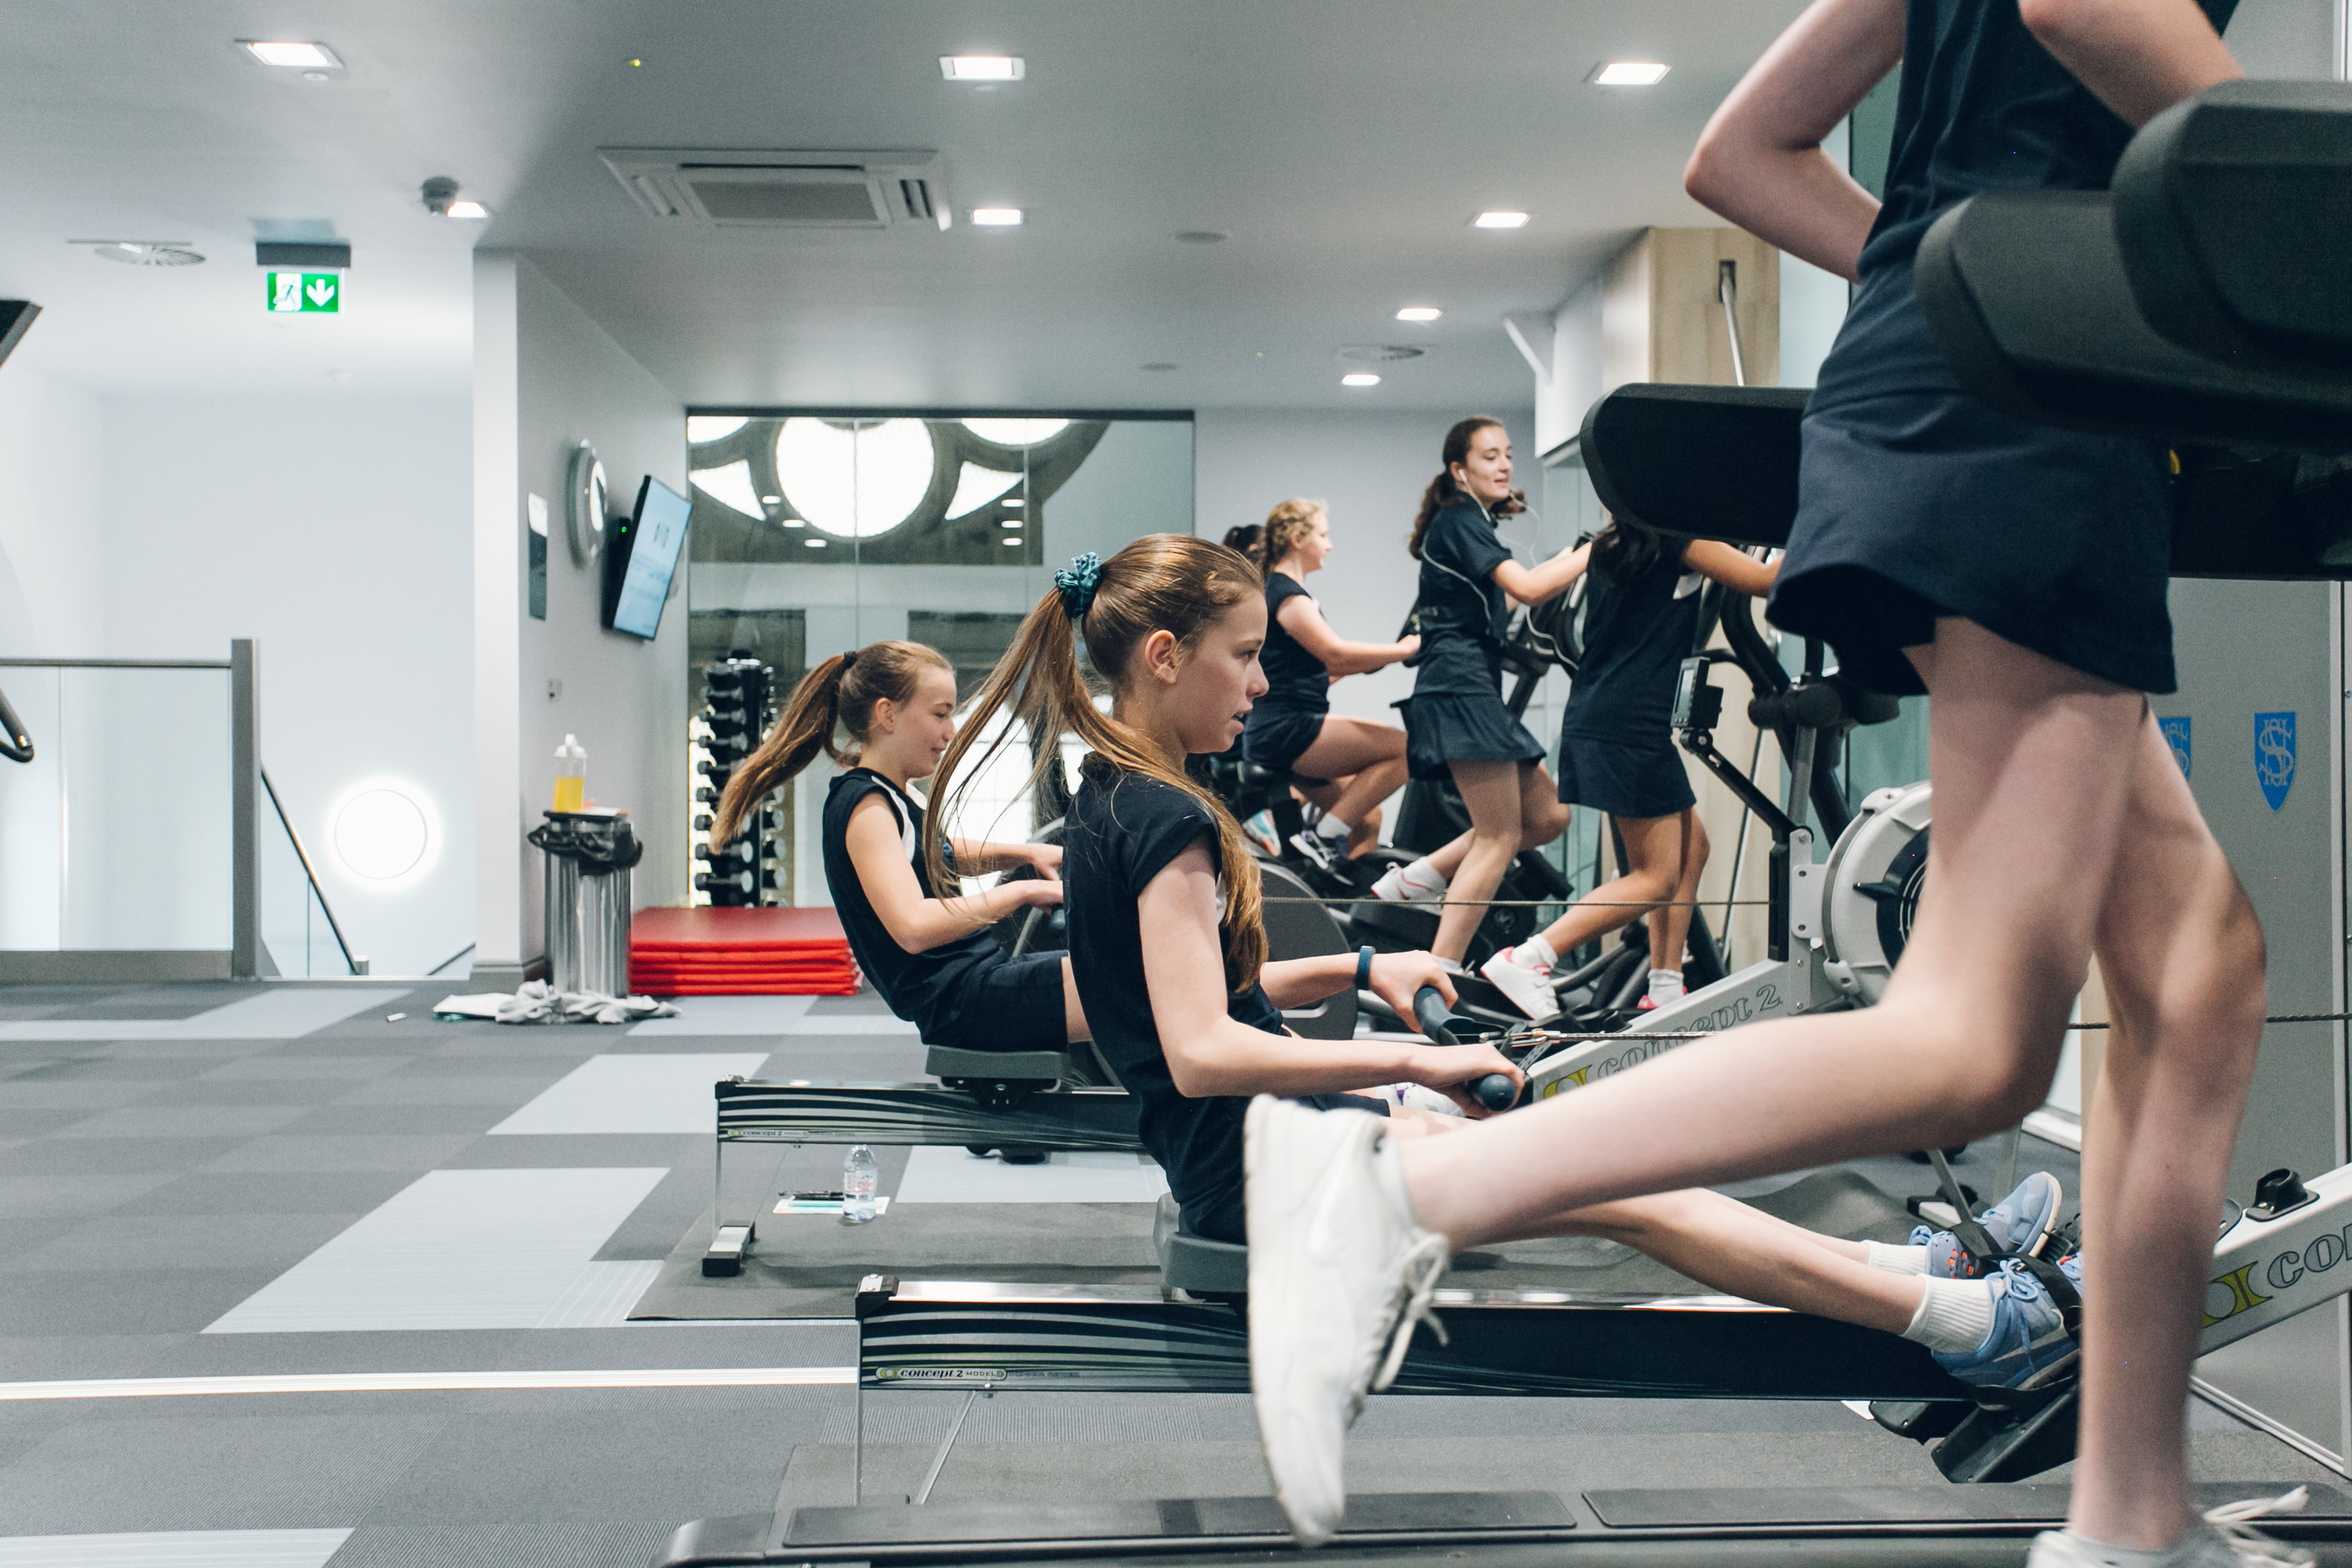 At Sheffield Girls' we aim to promote health and fitness for both current and future lifestyles.